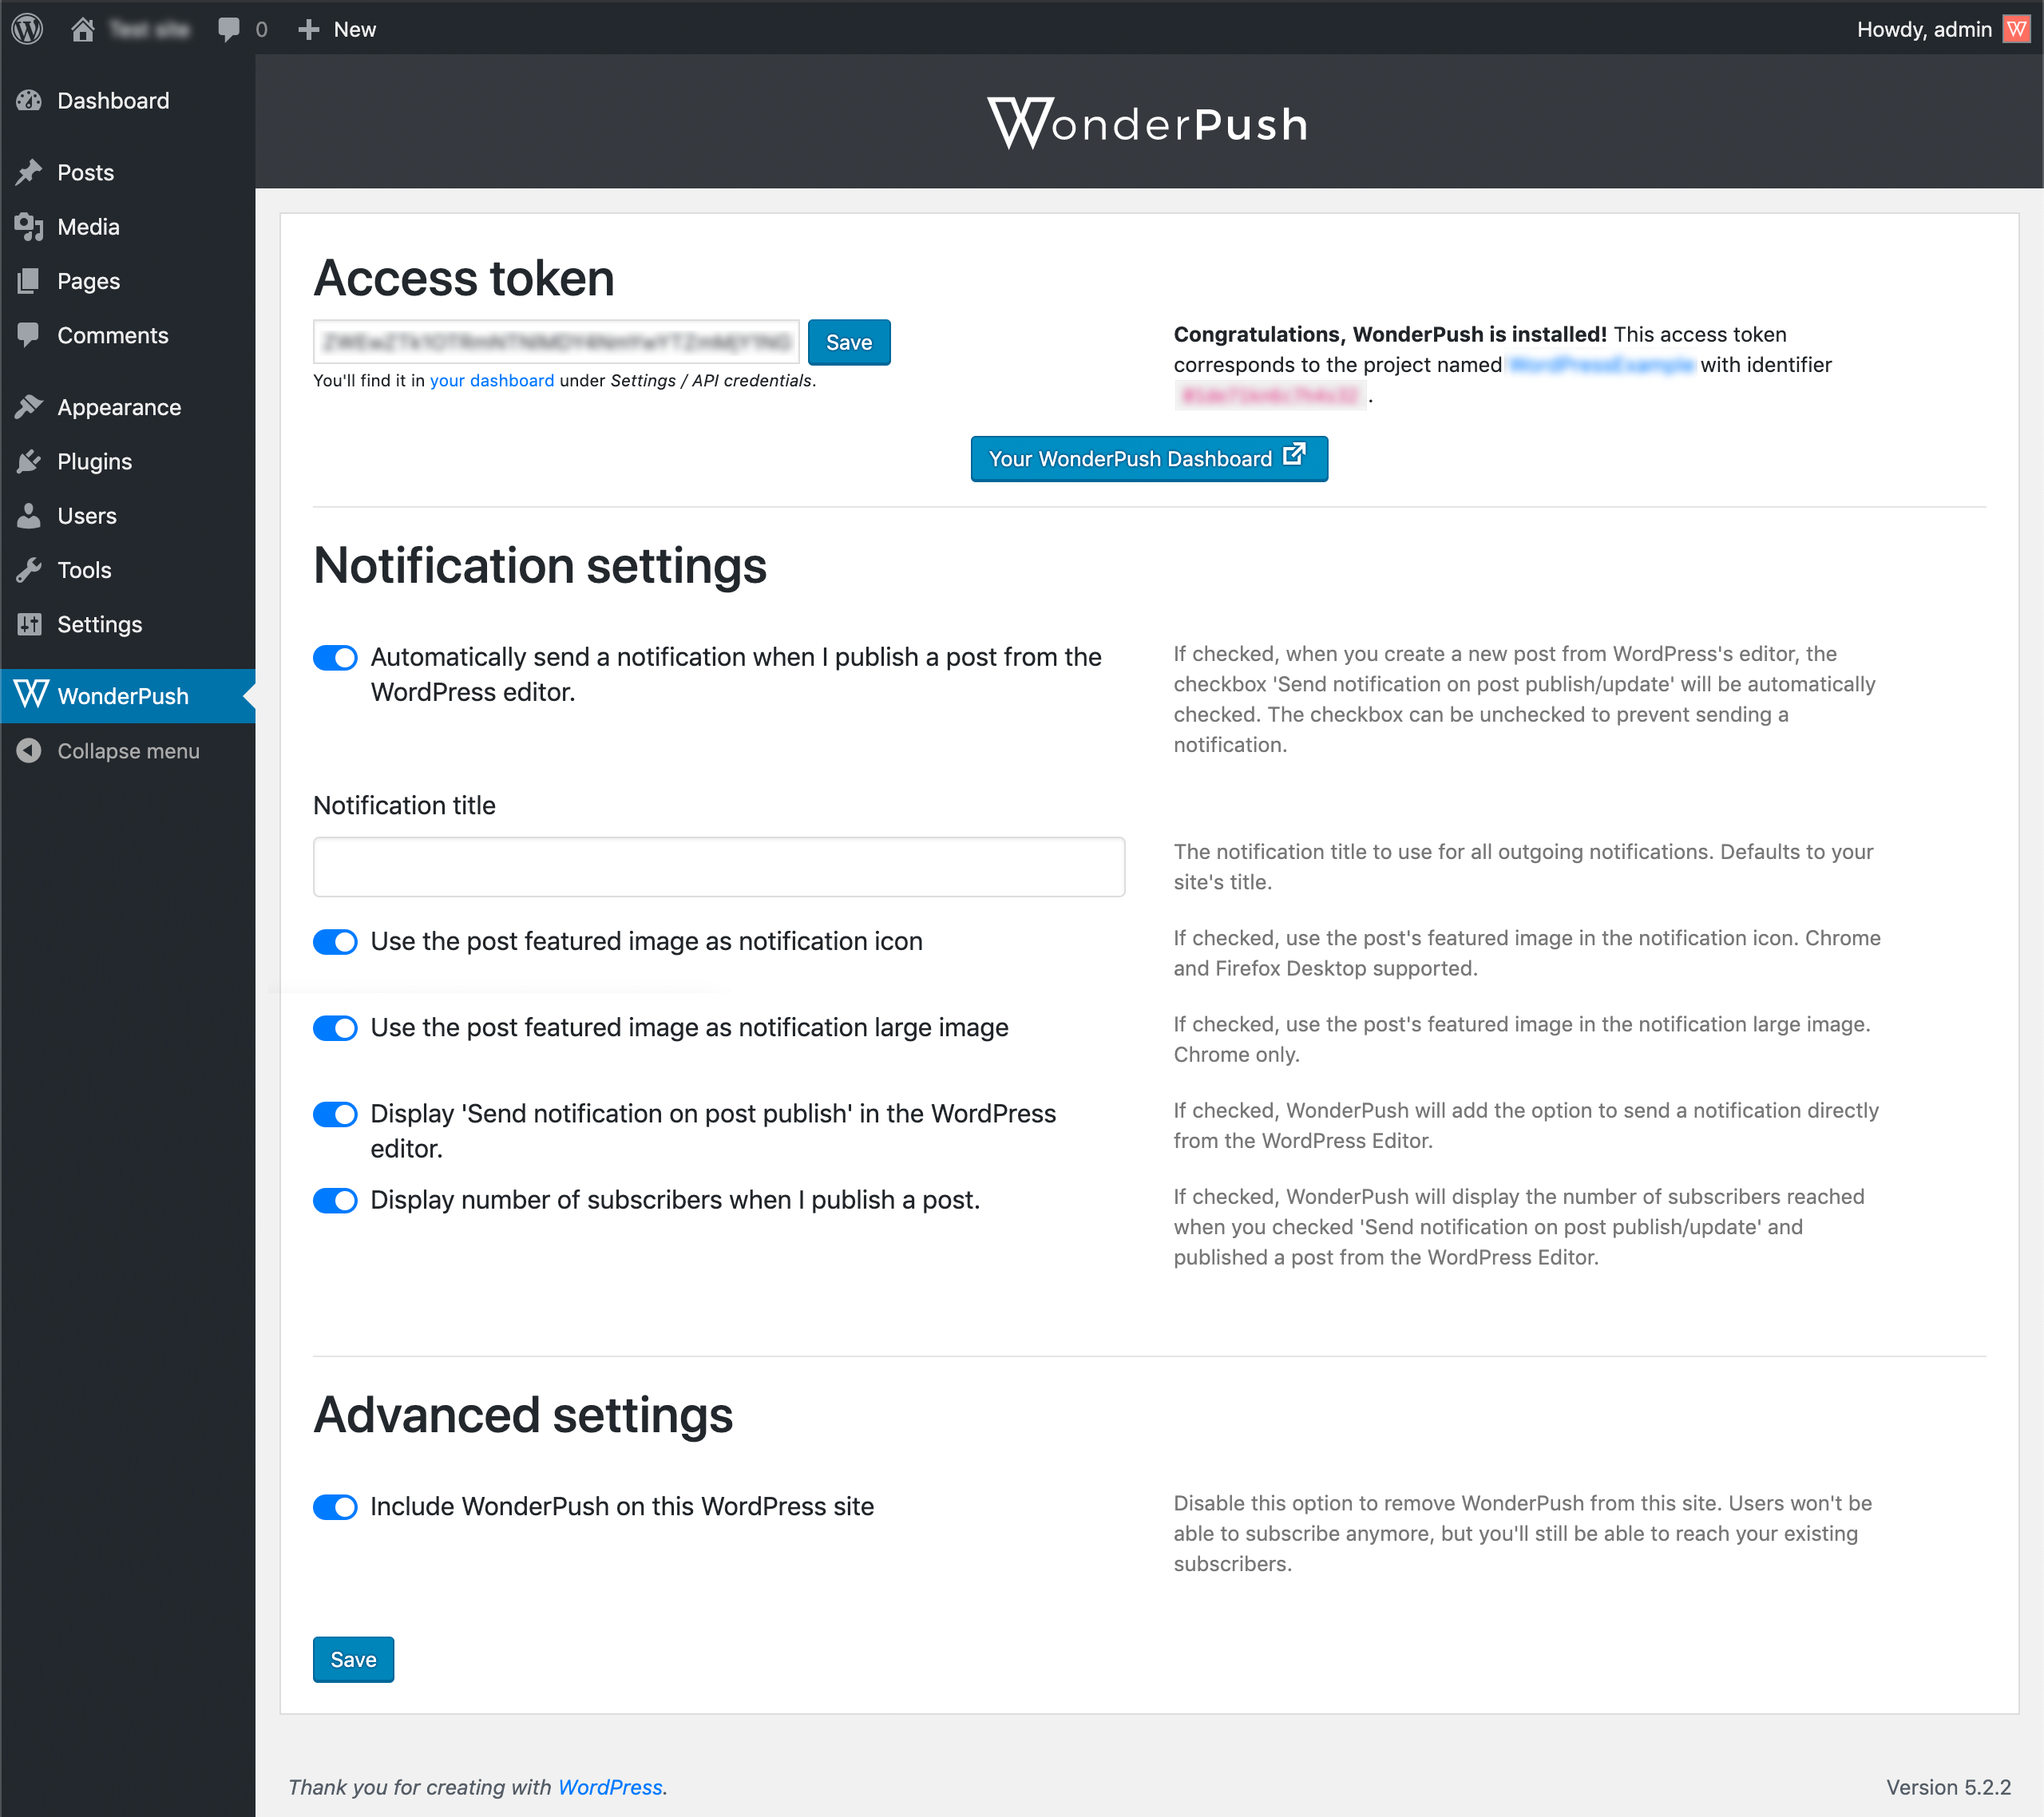 The setup page of our WonderPush plugin for WordPress